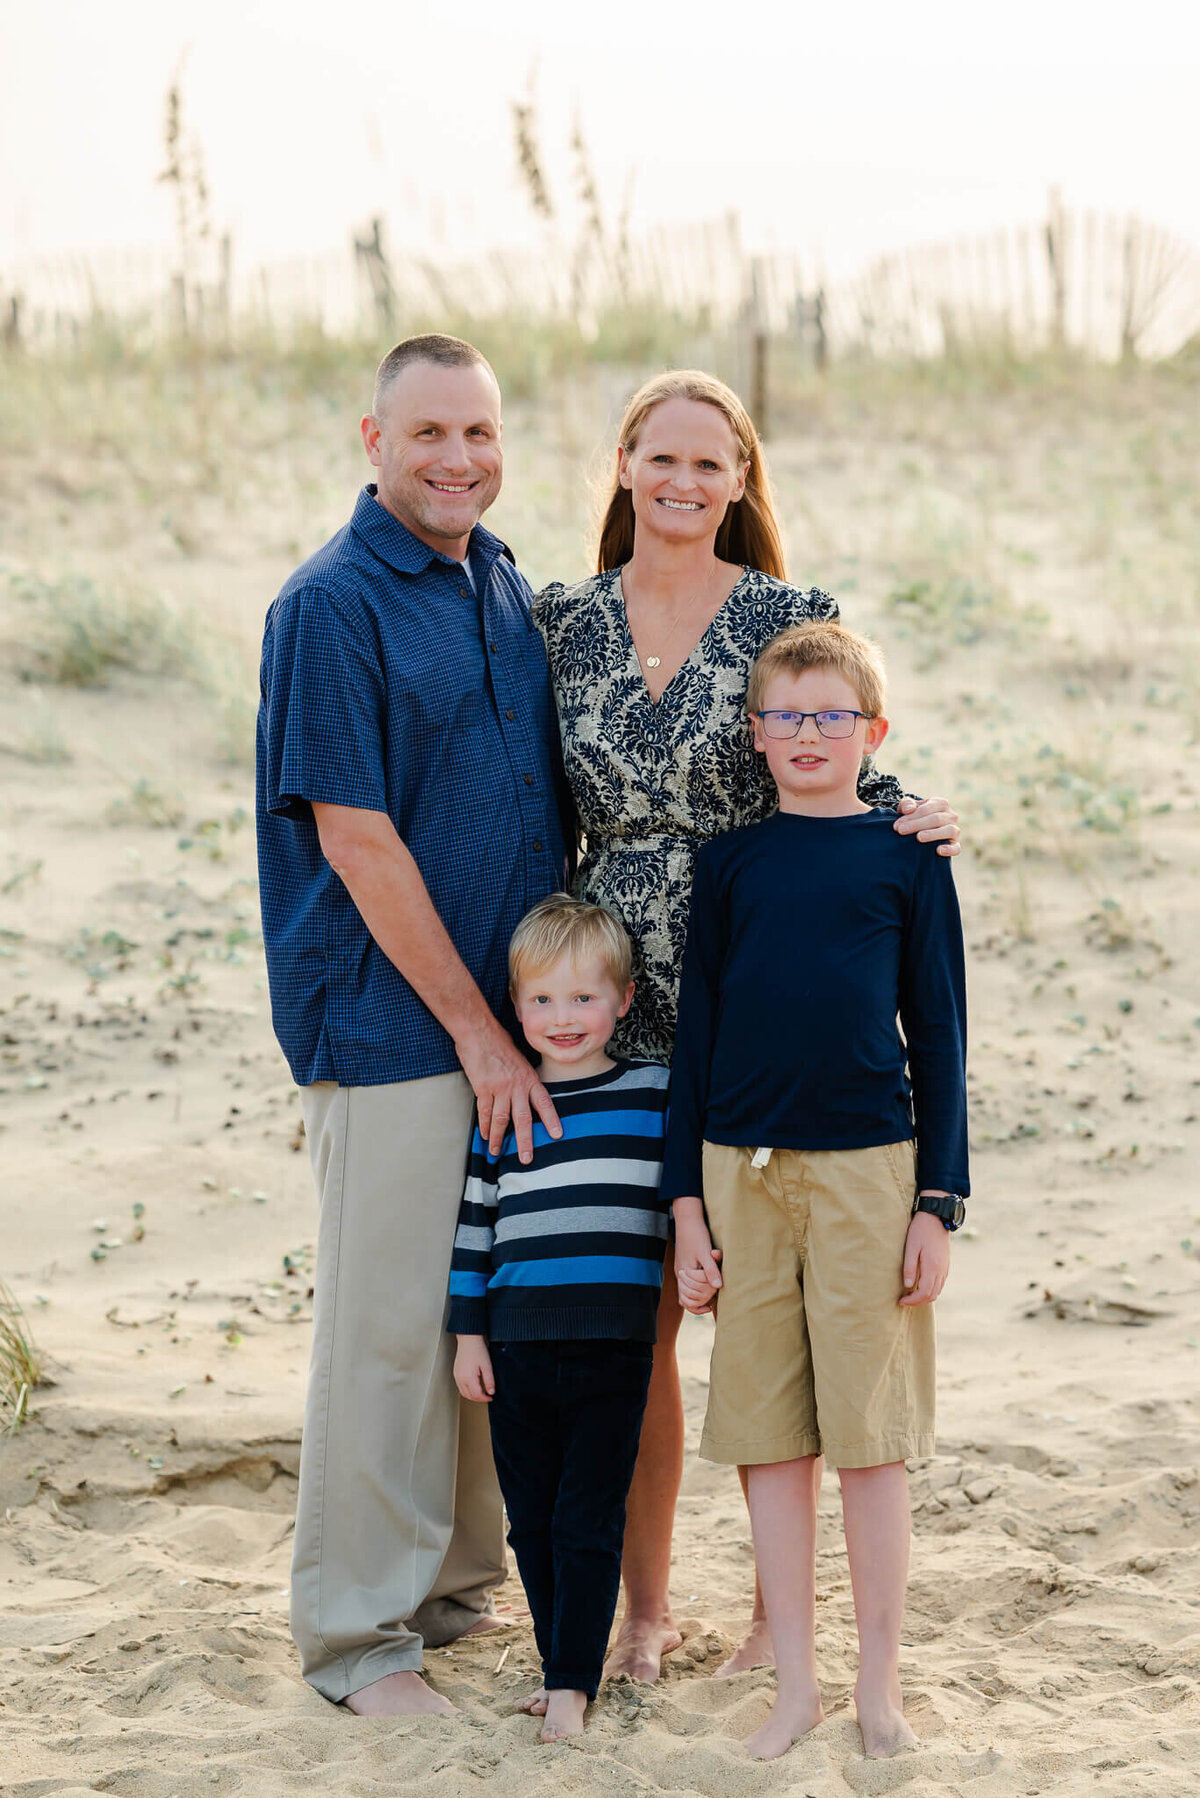 Two brothers put their arms around each other while their parents do the same behind them at an Outer Banks family session on the beach.